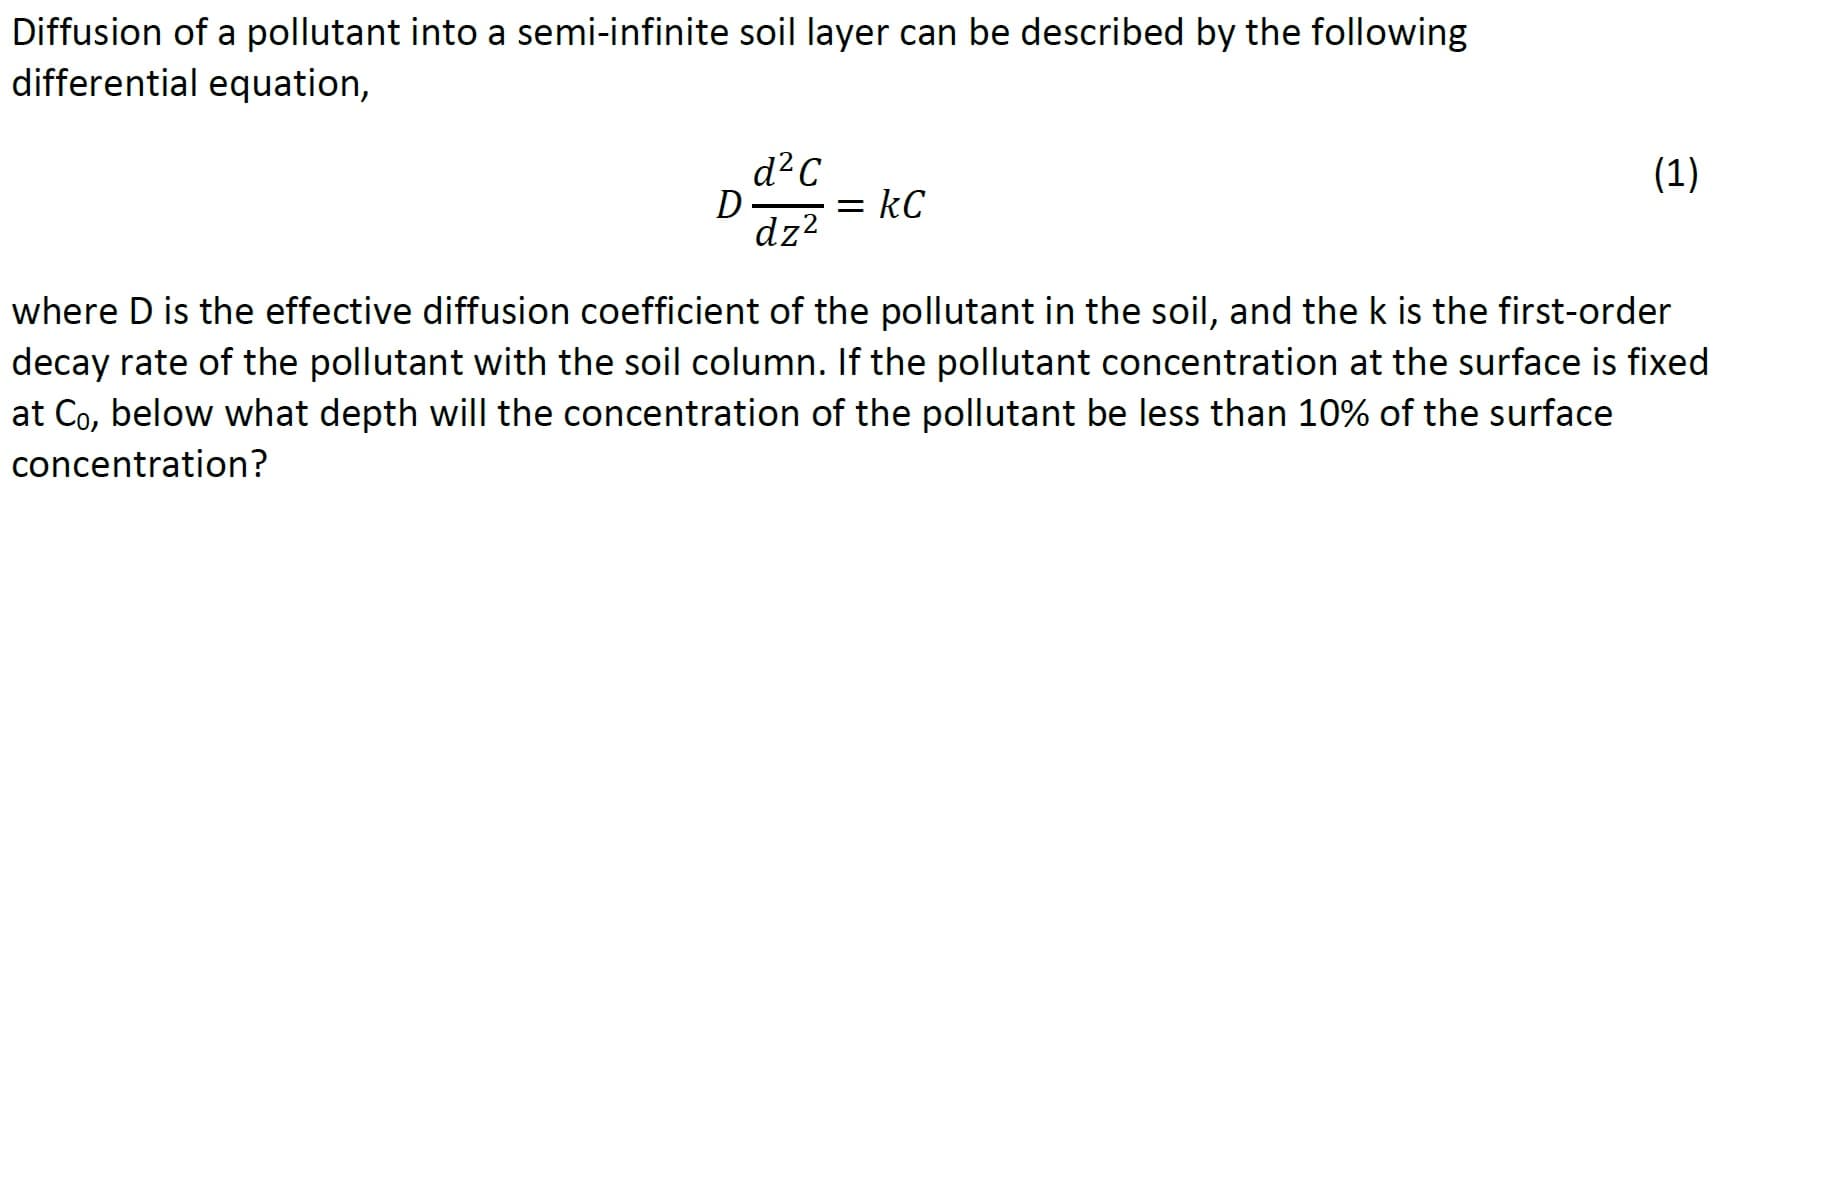 Diffusion of a pollutant into a semi-infinite soil layer can be described by the following
differential equation,
d²C
(1)
= kC
dz?
where D is the effective diffusion coefficient of the pollutant in the soil, and the k is the first-order
decay rate of the pollutant with the soil column. If the pollutant concentration at the surface is fixed
at Co, below what depth will the concentration of the pollutant be less than 10% of the surface
concentration?
